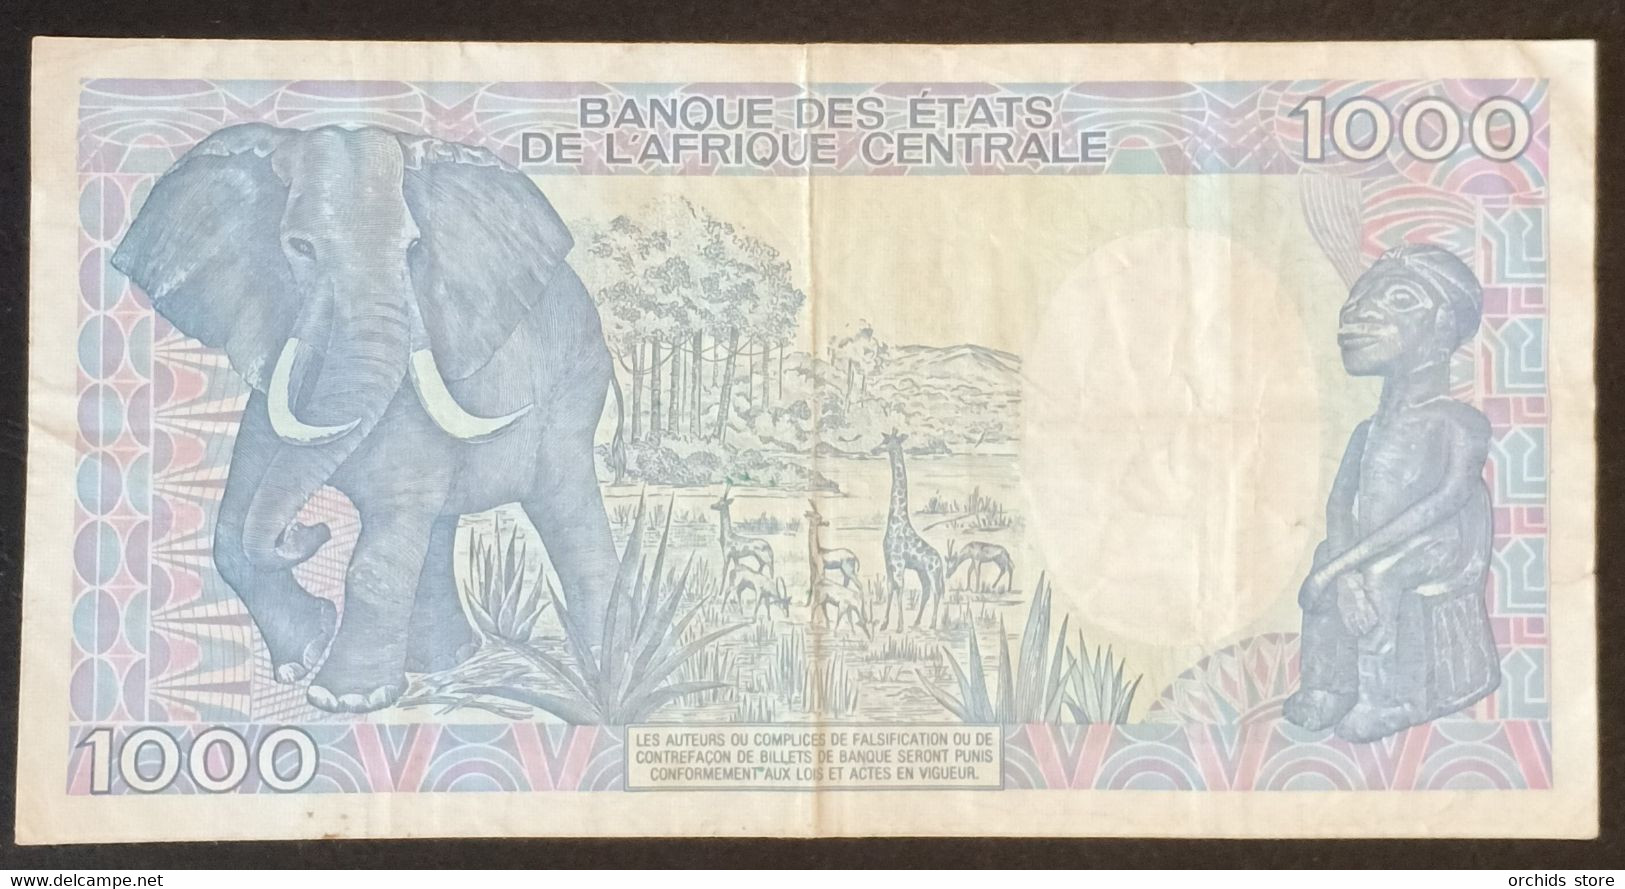 AC2020 - Chad 1991 Banknote 1000 Francs KEY DATE Rare Find - Tsjaad